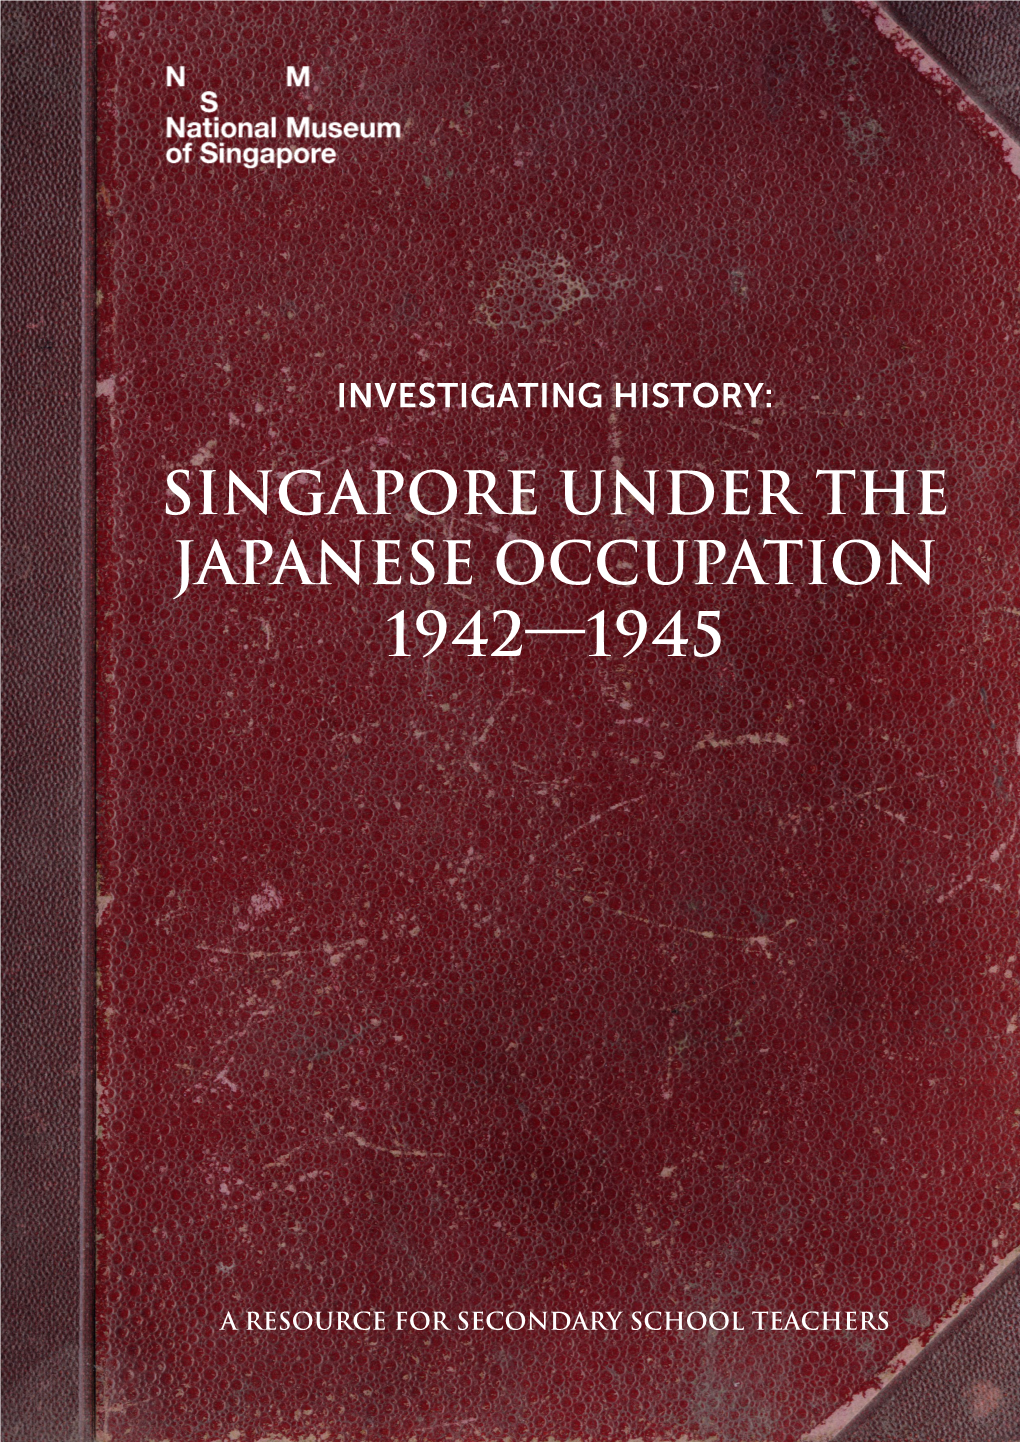 Singapore Under the Japanese Occupation 1942—1945